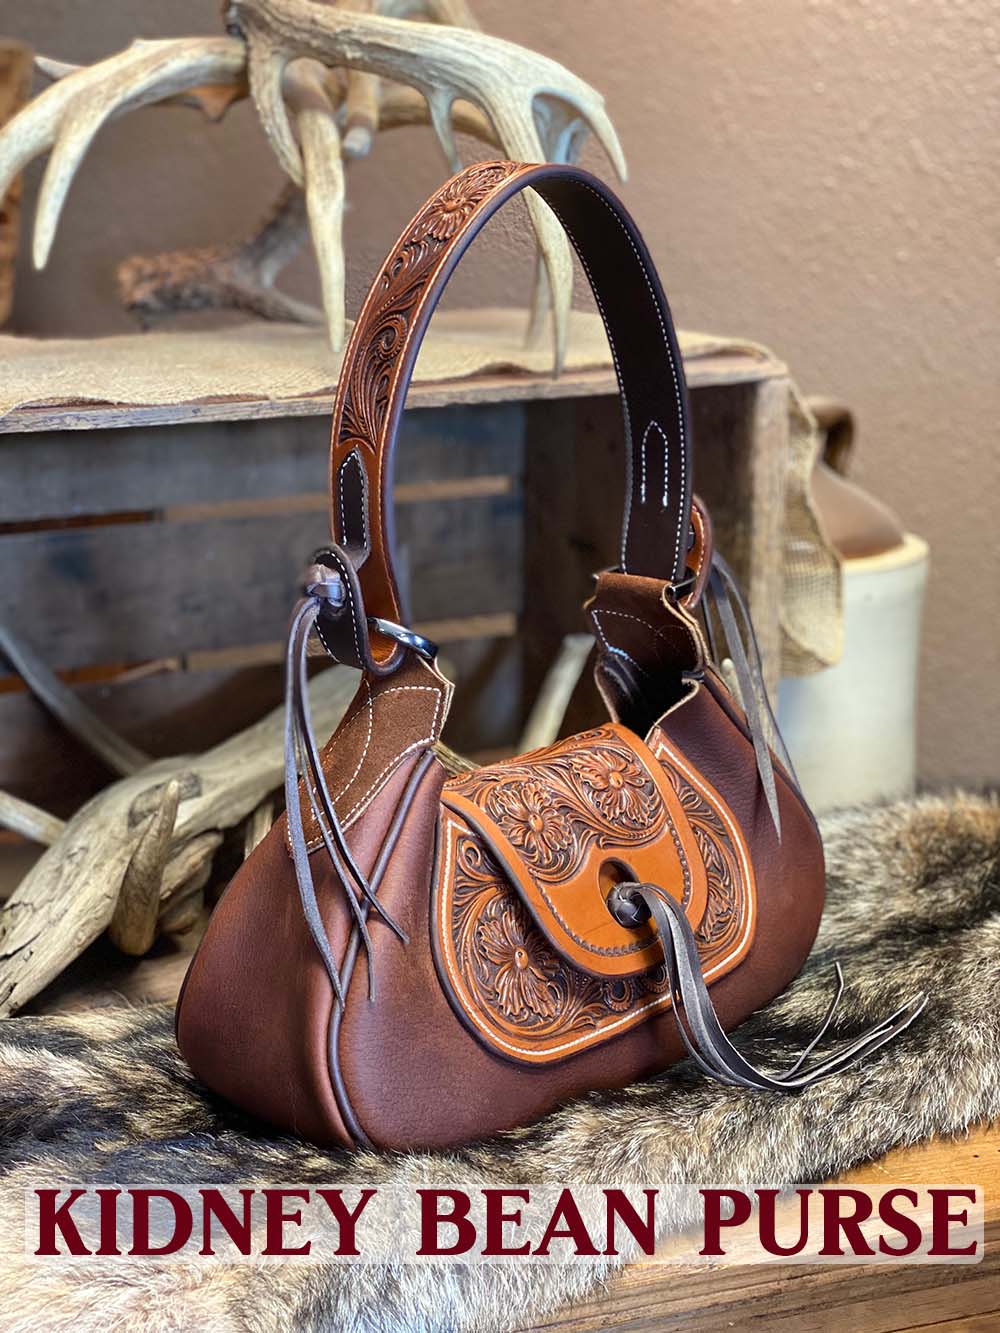 Brown patterned kidney bag for sale in Co. Dublin for €22 on DoneDeal